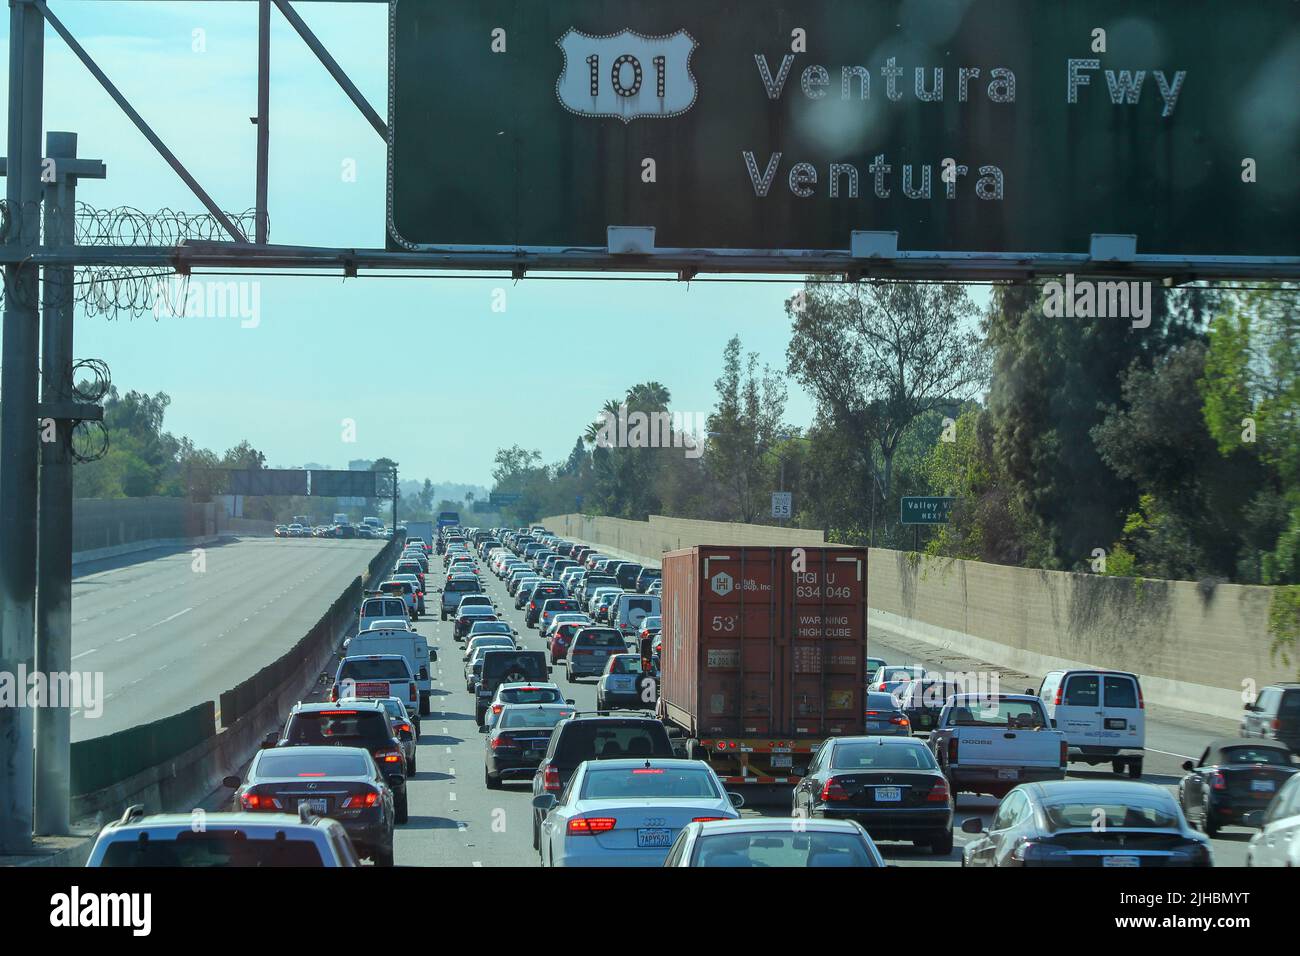 Los Angeles - USA - 03,15,2014: Los Angeles city roads and Ventura road in USA Stock Photo